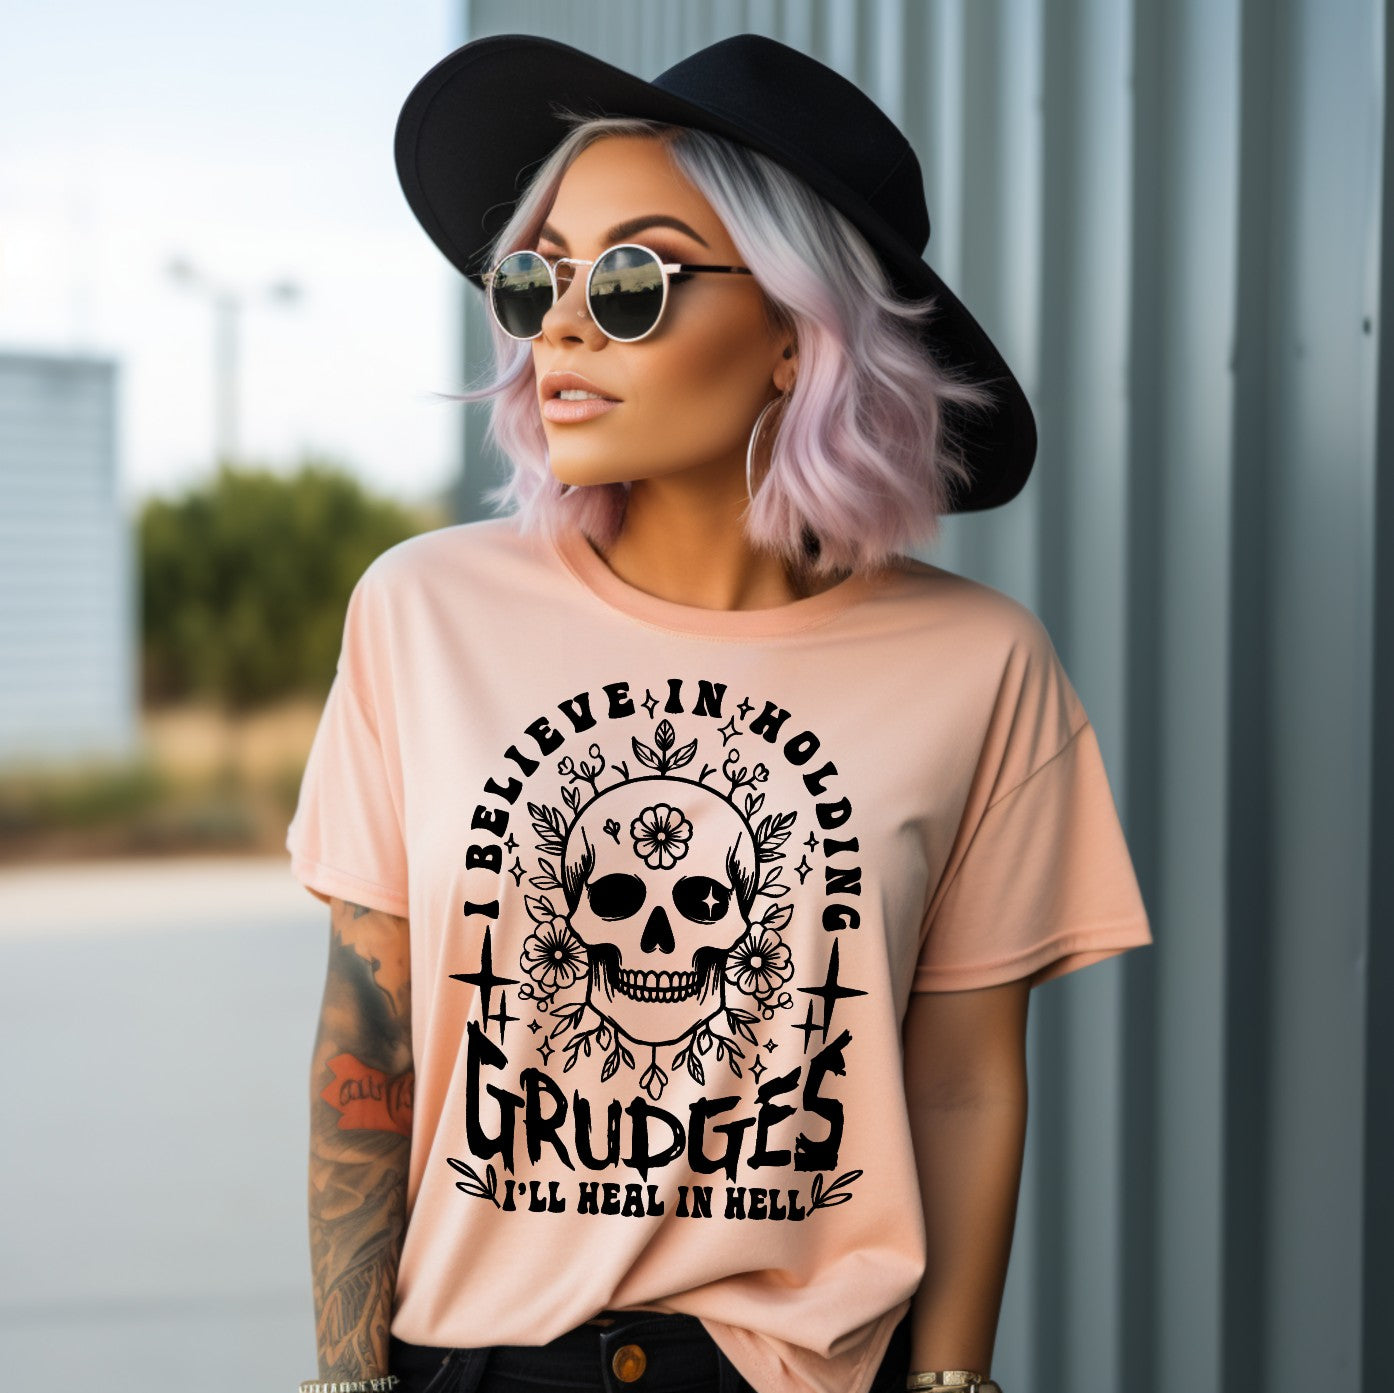 I Believe in Holding Grudges Short Sleeve Graphic Tee